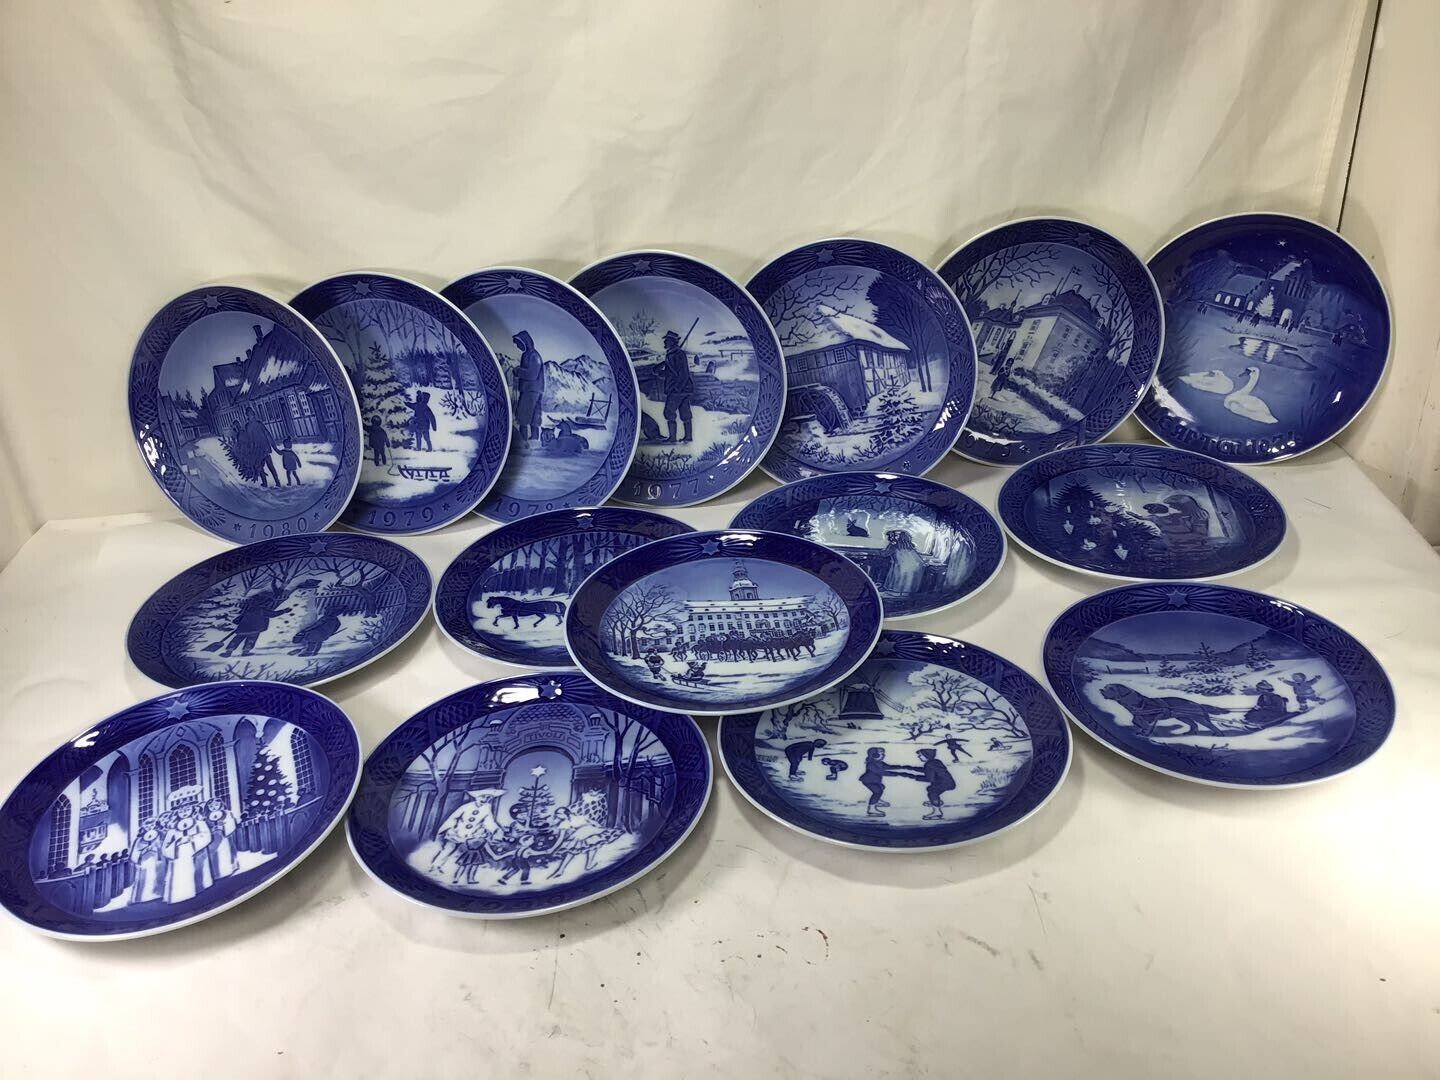 II48 Vintage There Are 15 years in Total Blue Royal Collecter Plate Set of 15